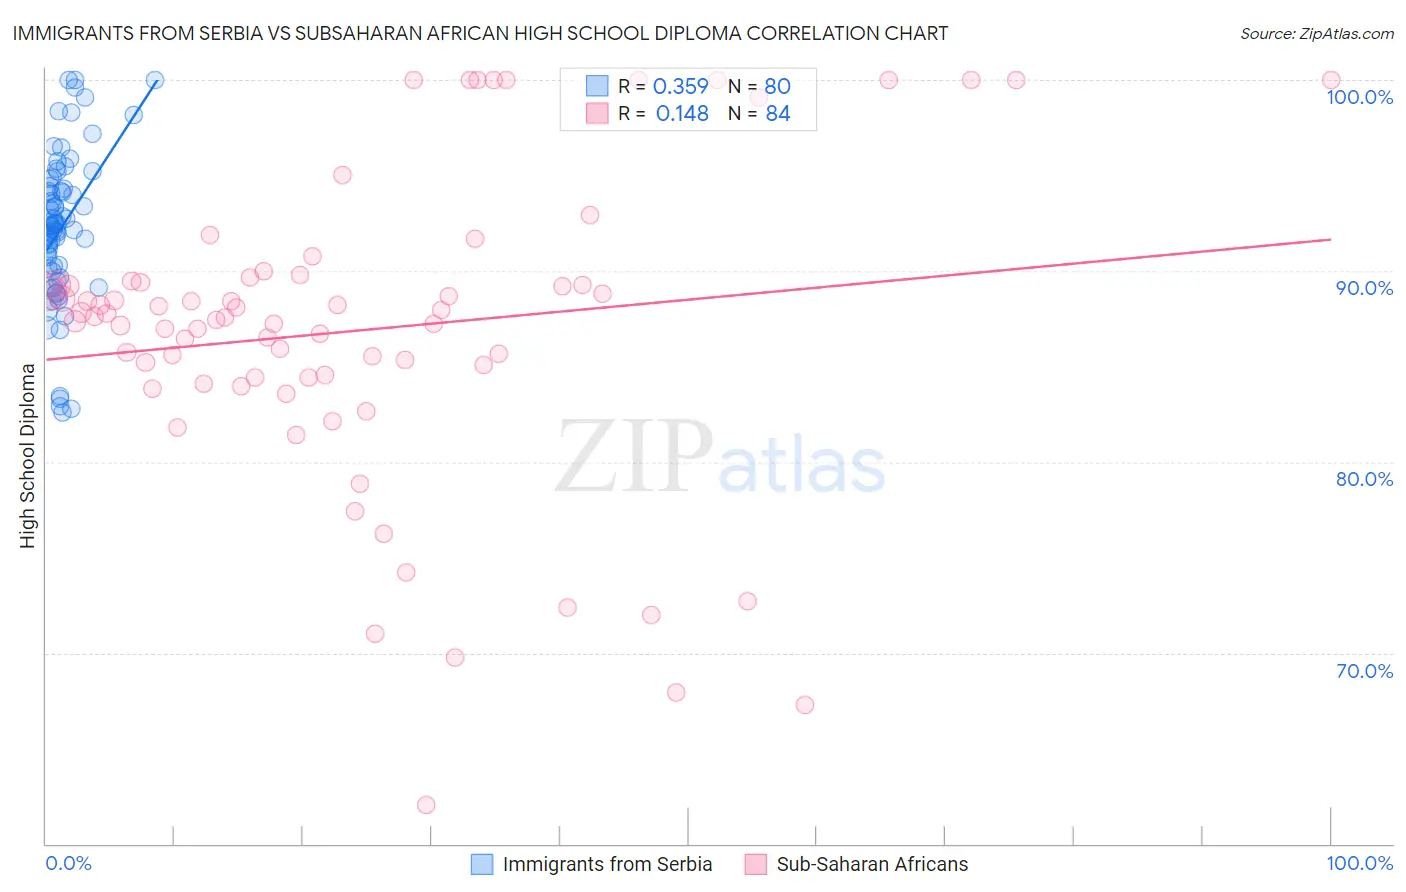 Immigrants from Serbia vs Subsaharan African High School Diploma